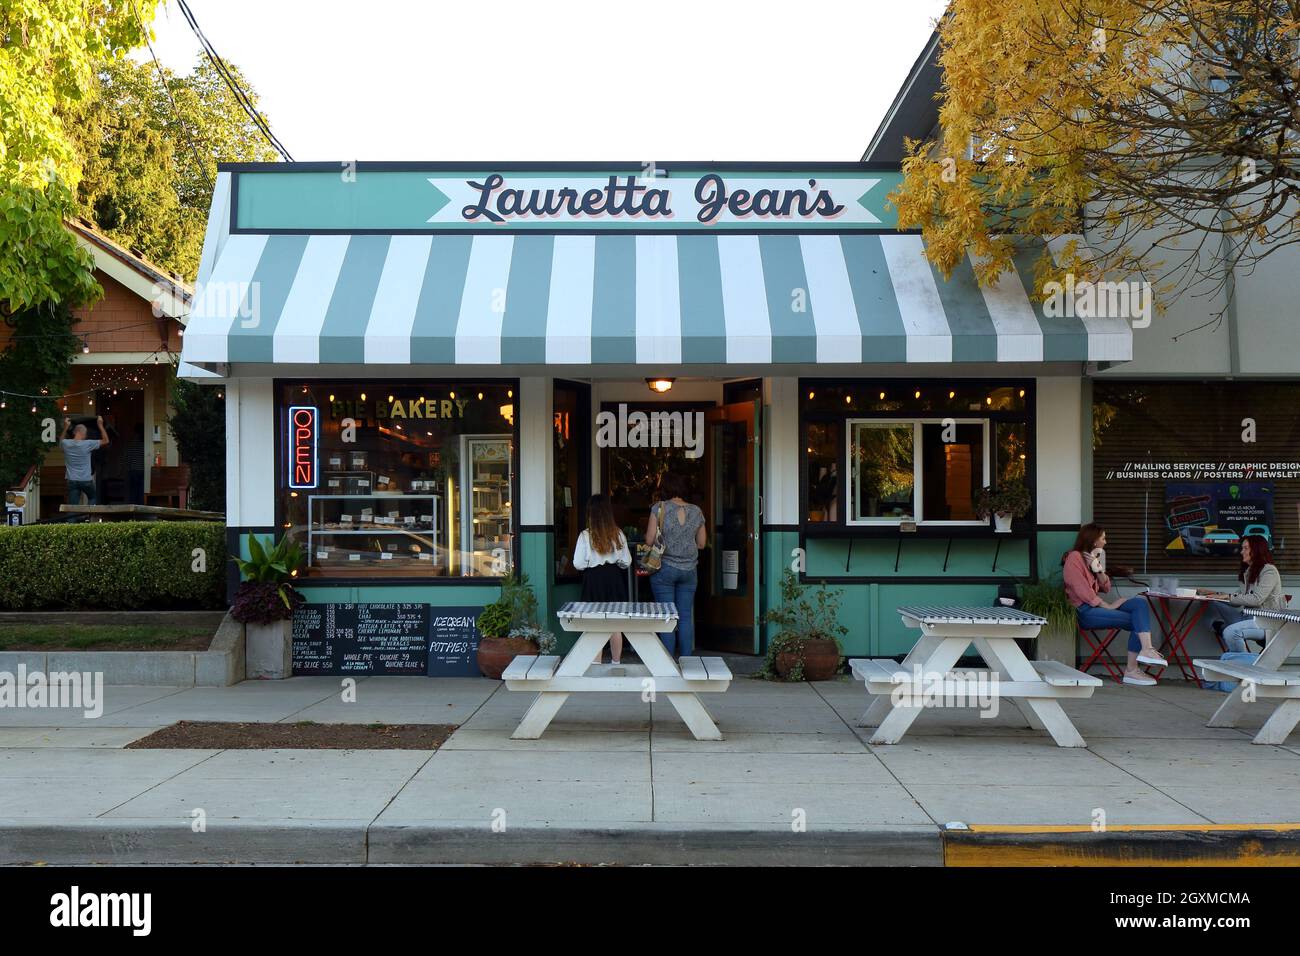 Lauretta Jean's, 3402 SE Division St, Portland, Oregon. exterior storefront of a sweet and savory pie bakery in the Richmond neighborhood. Stock Photo